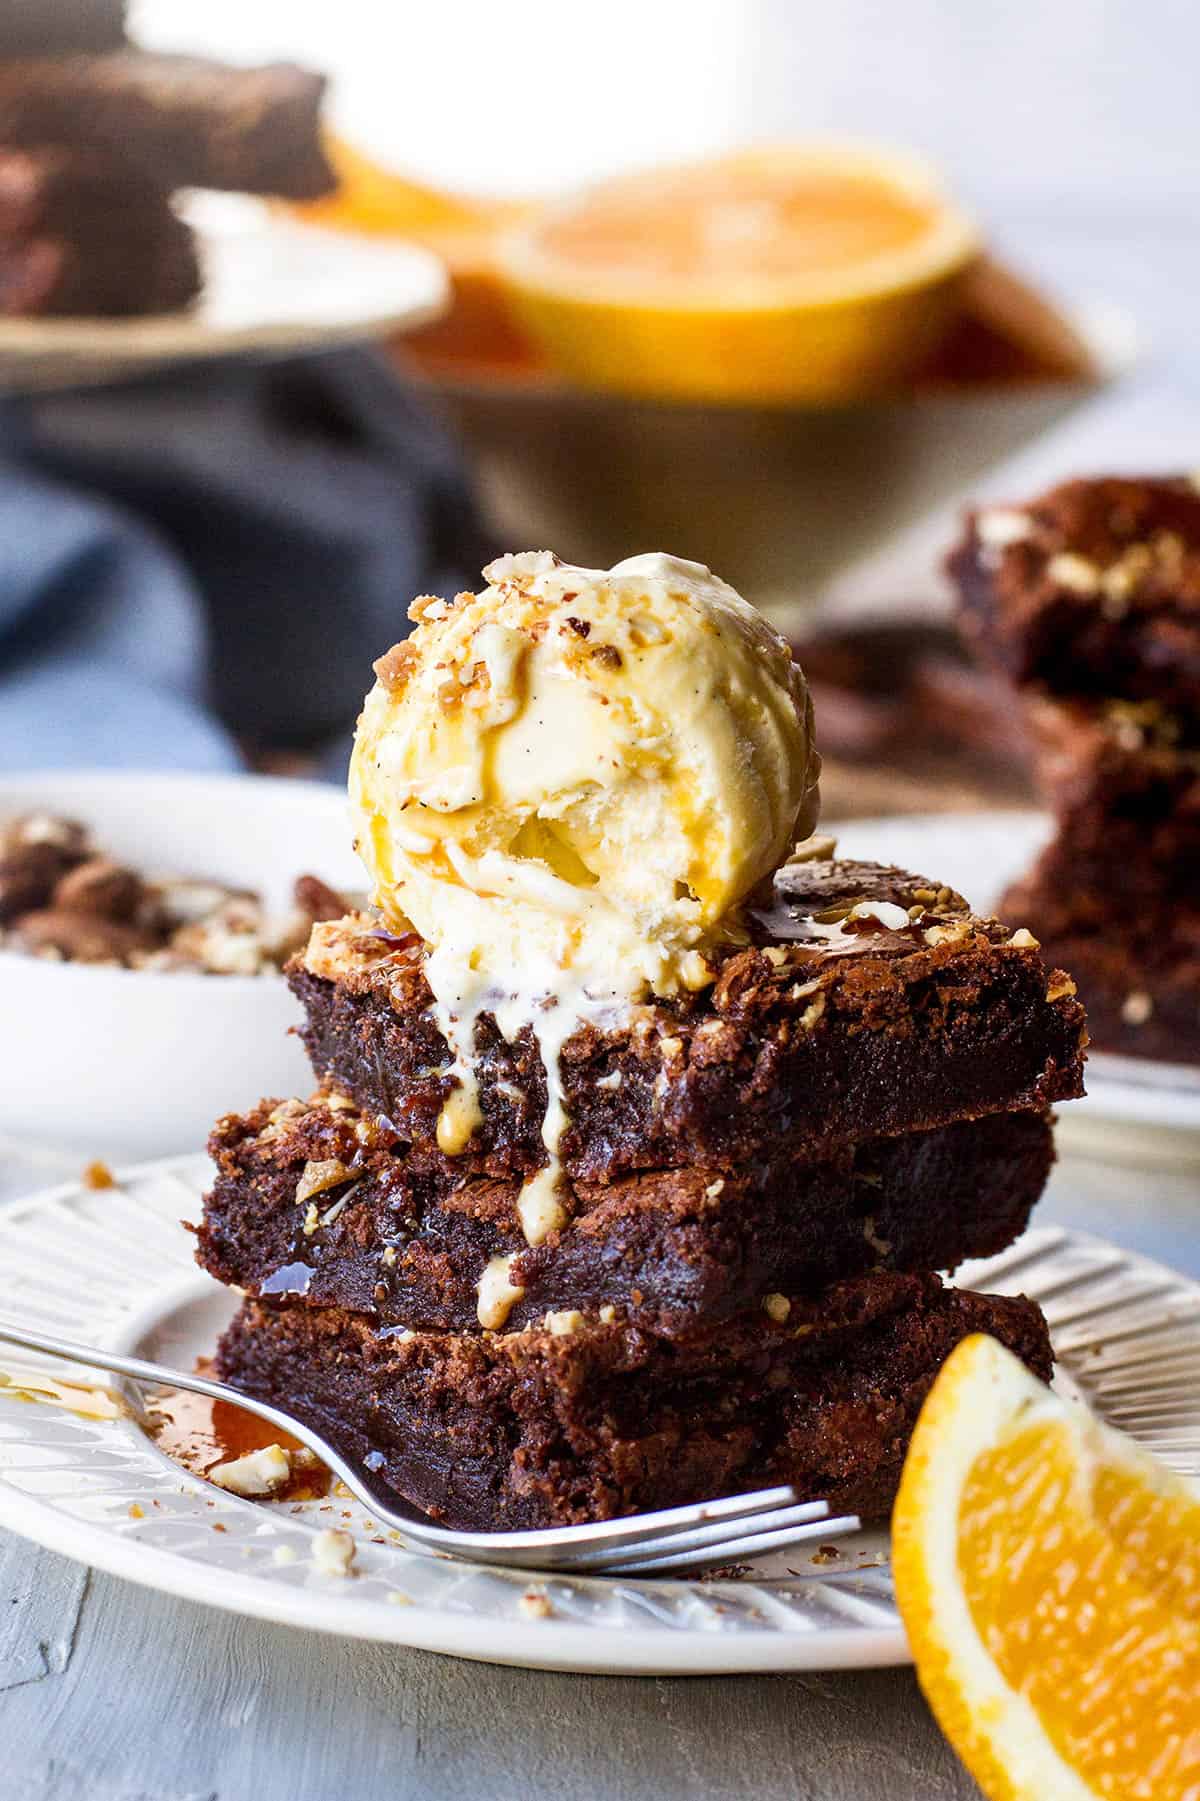 Three slices of brownies with ice cream on top.